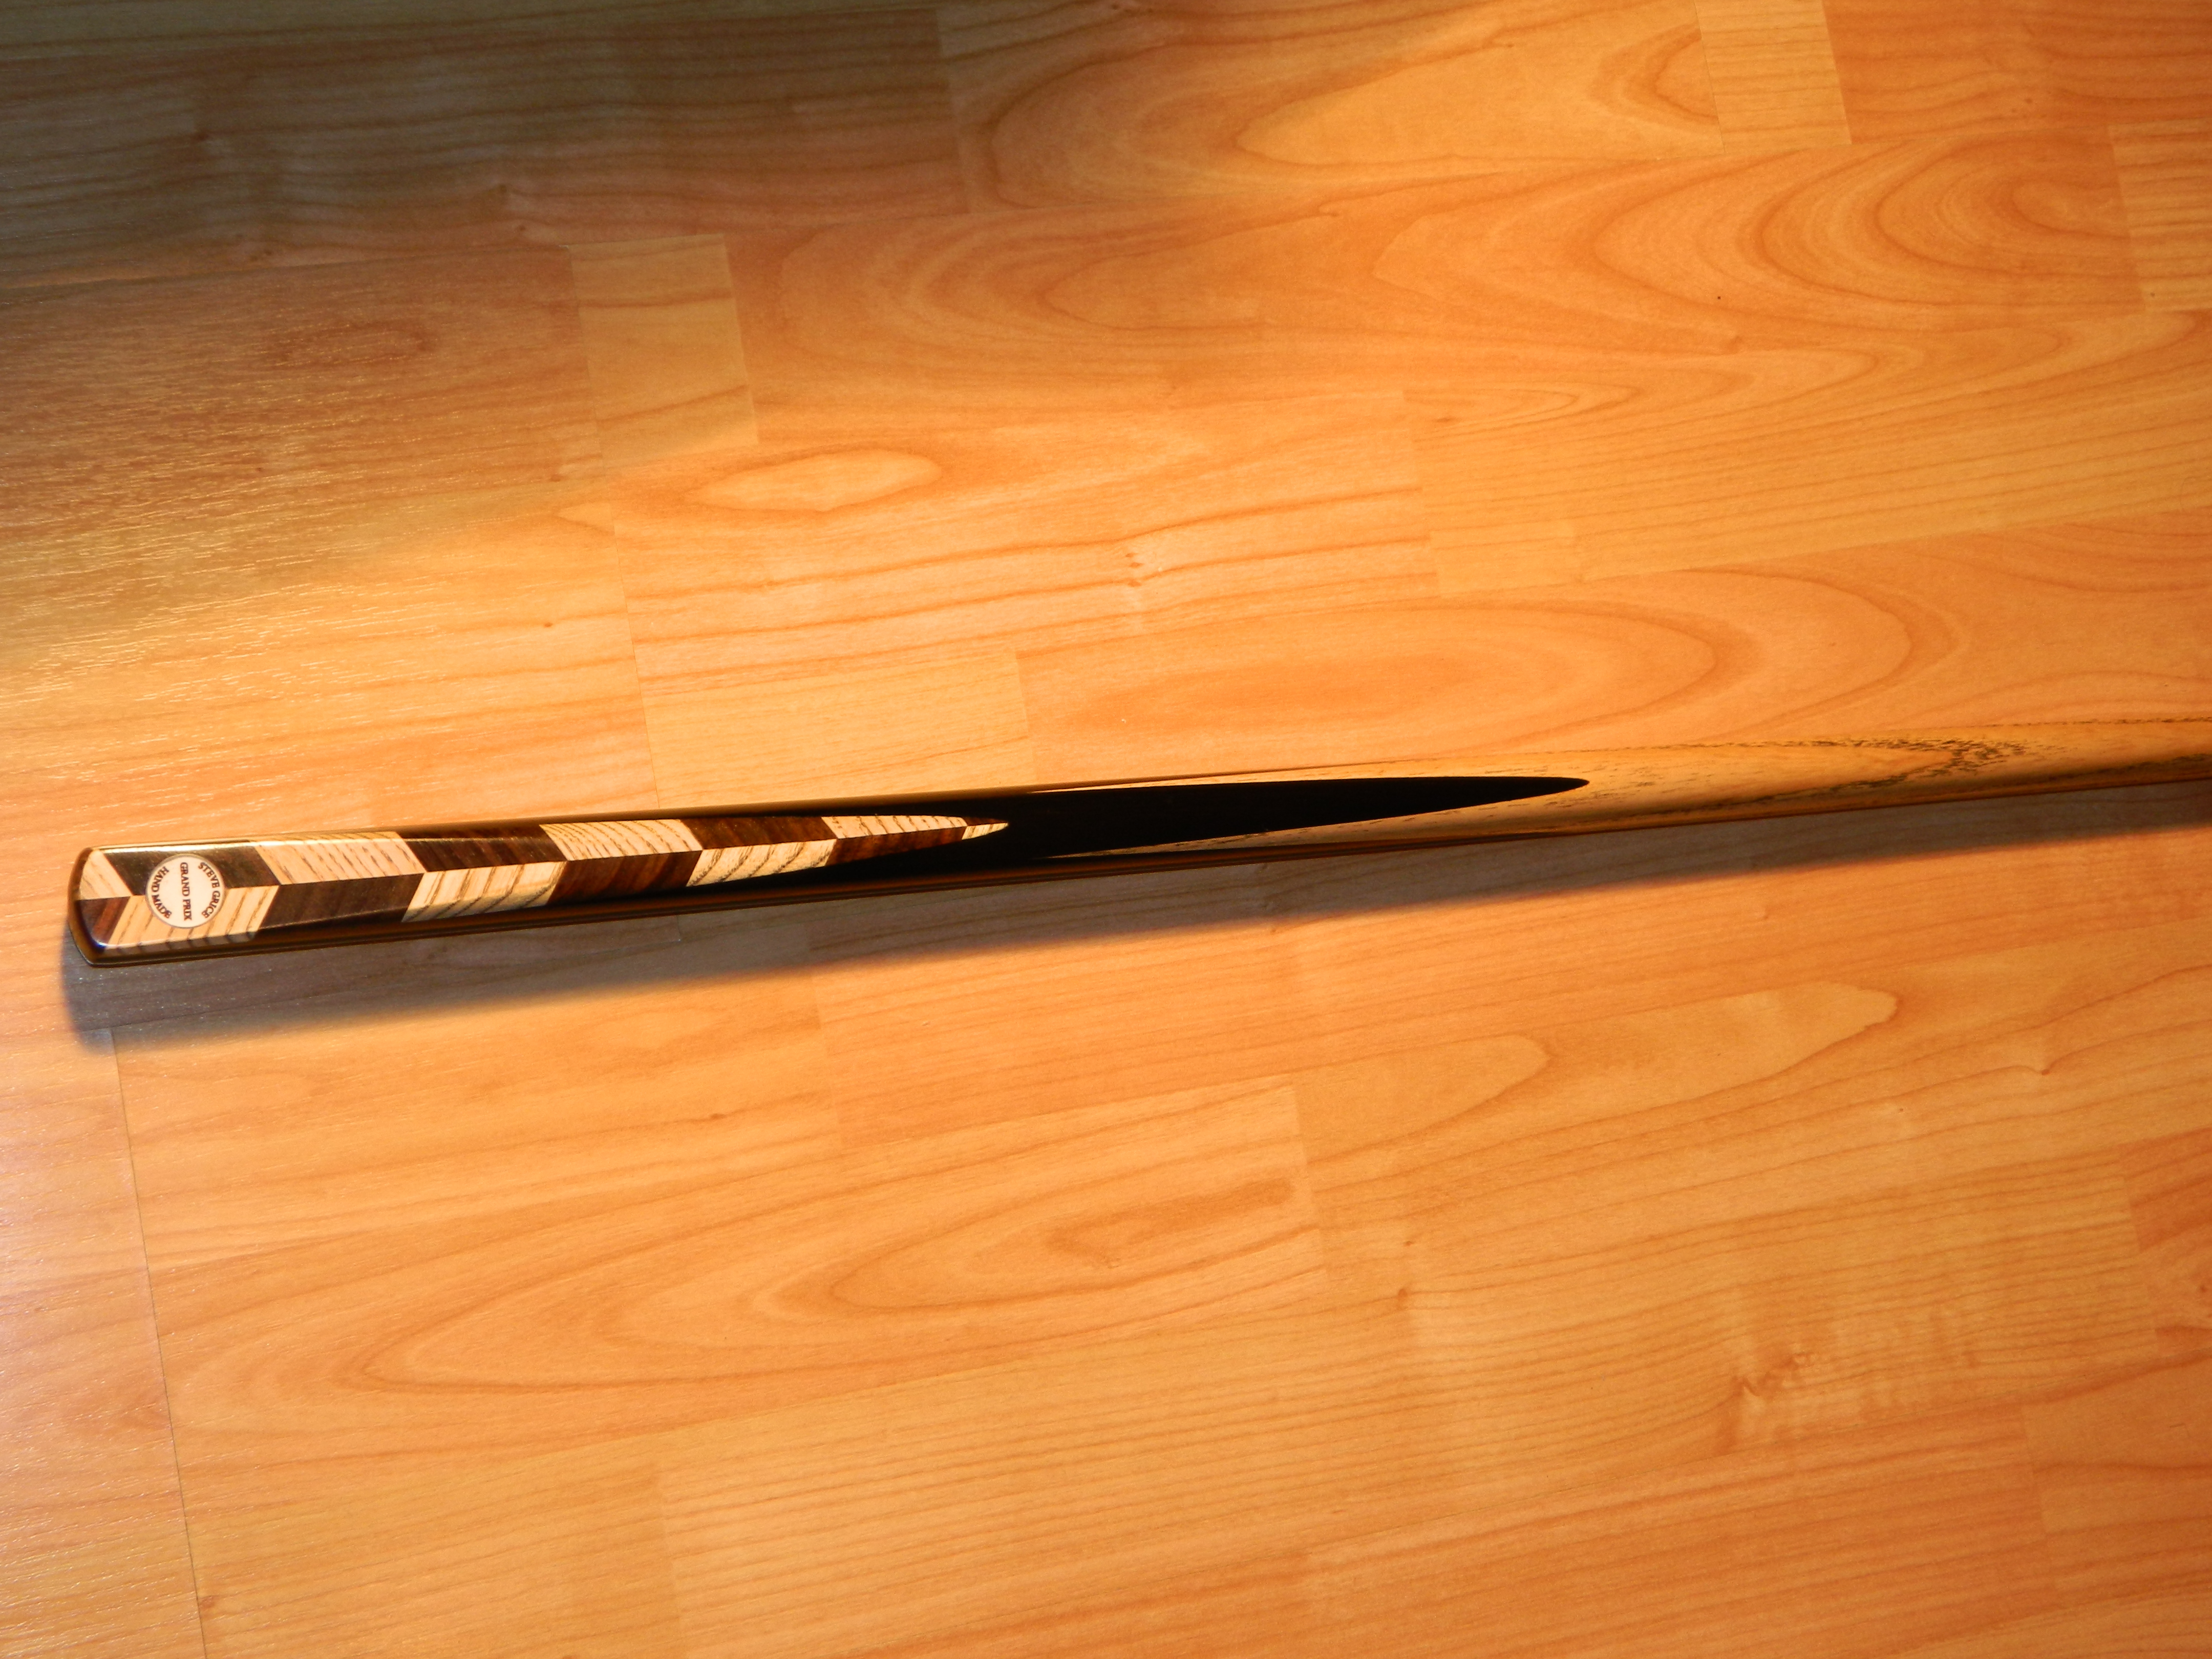 Steve Grice Grand Prix cue, an African ebony hand spliced butt with parquetry wedge of contra stacked rosewood and ash.